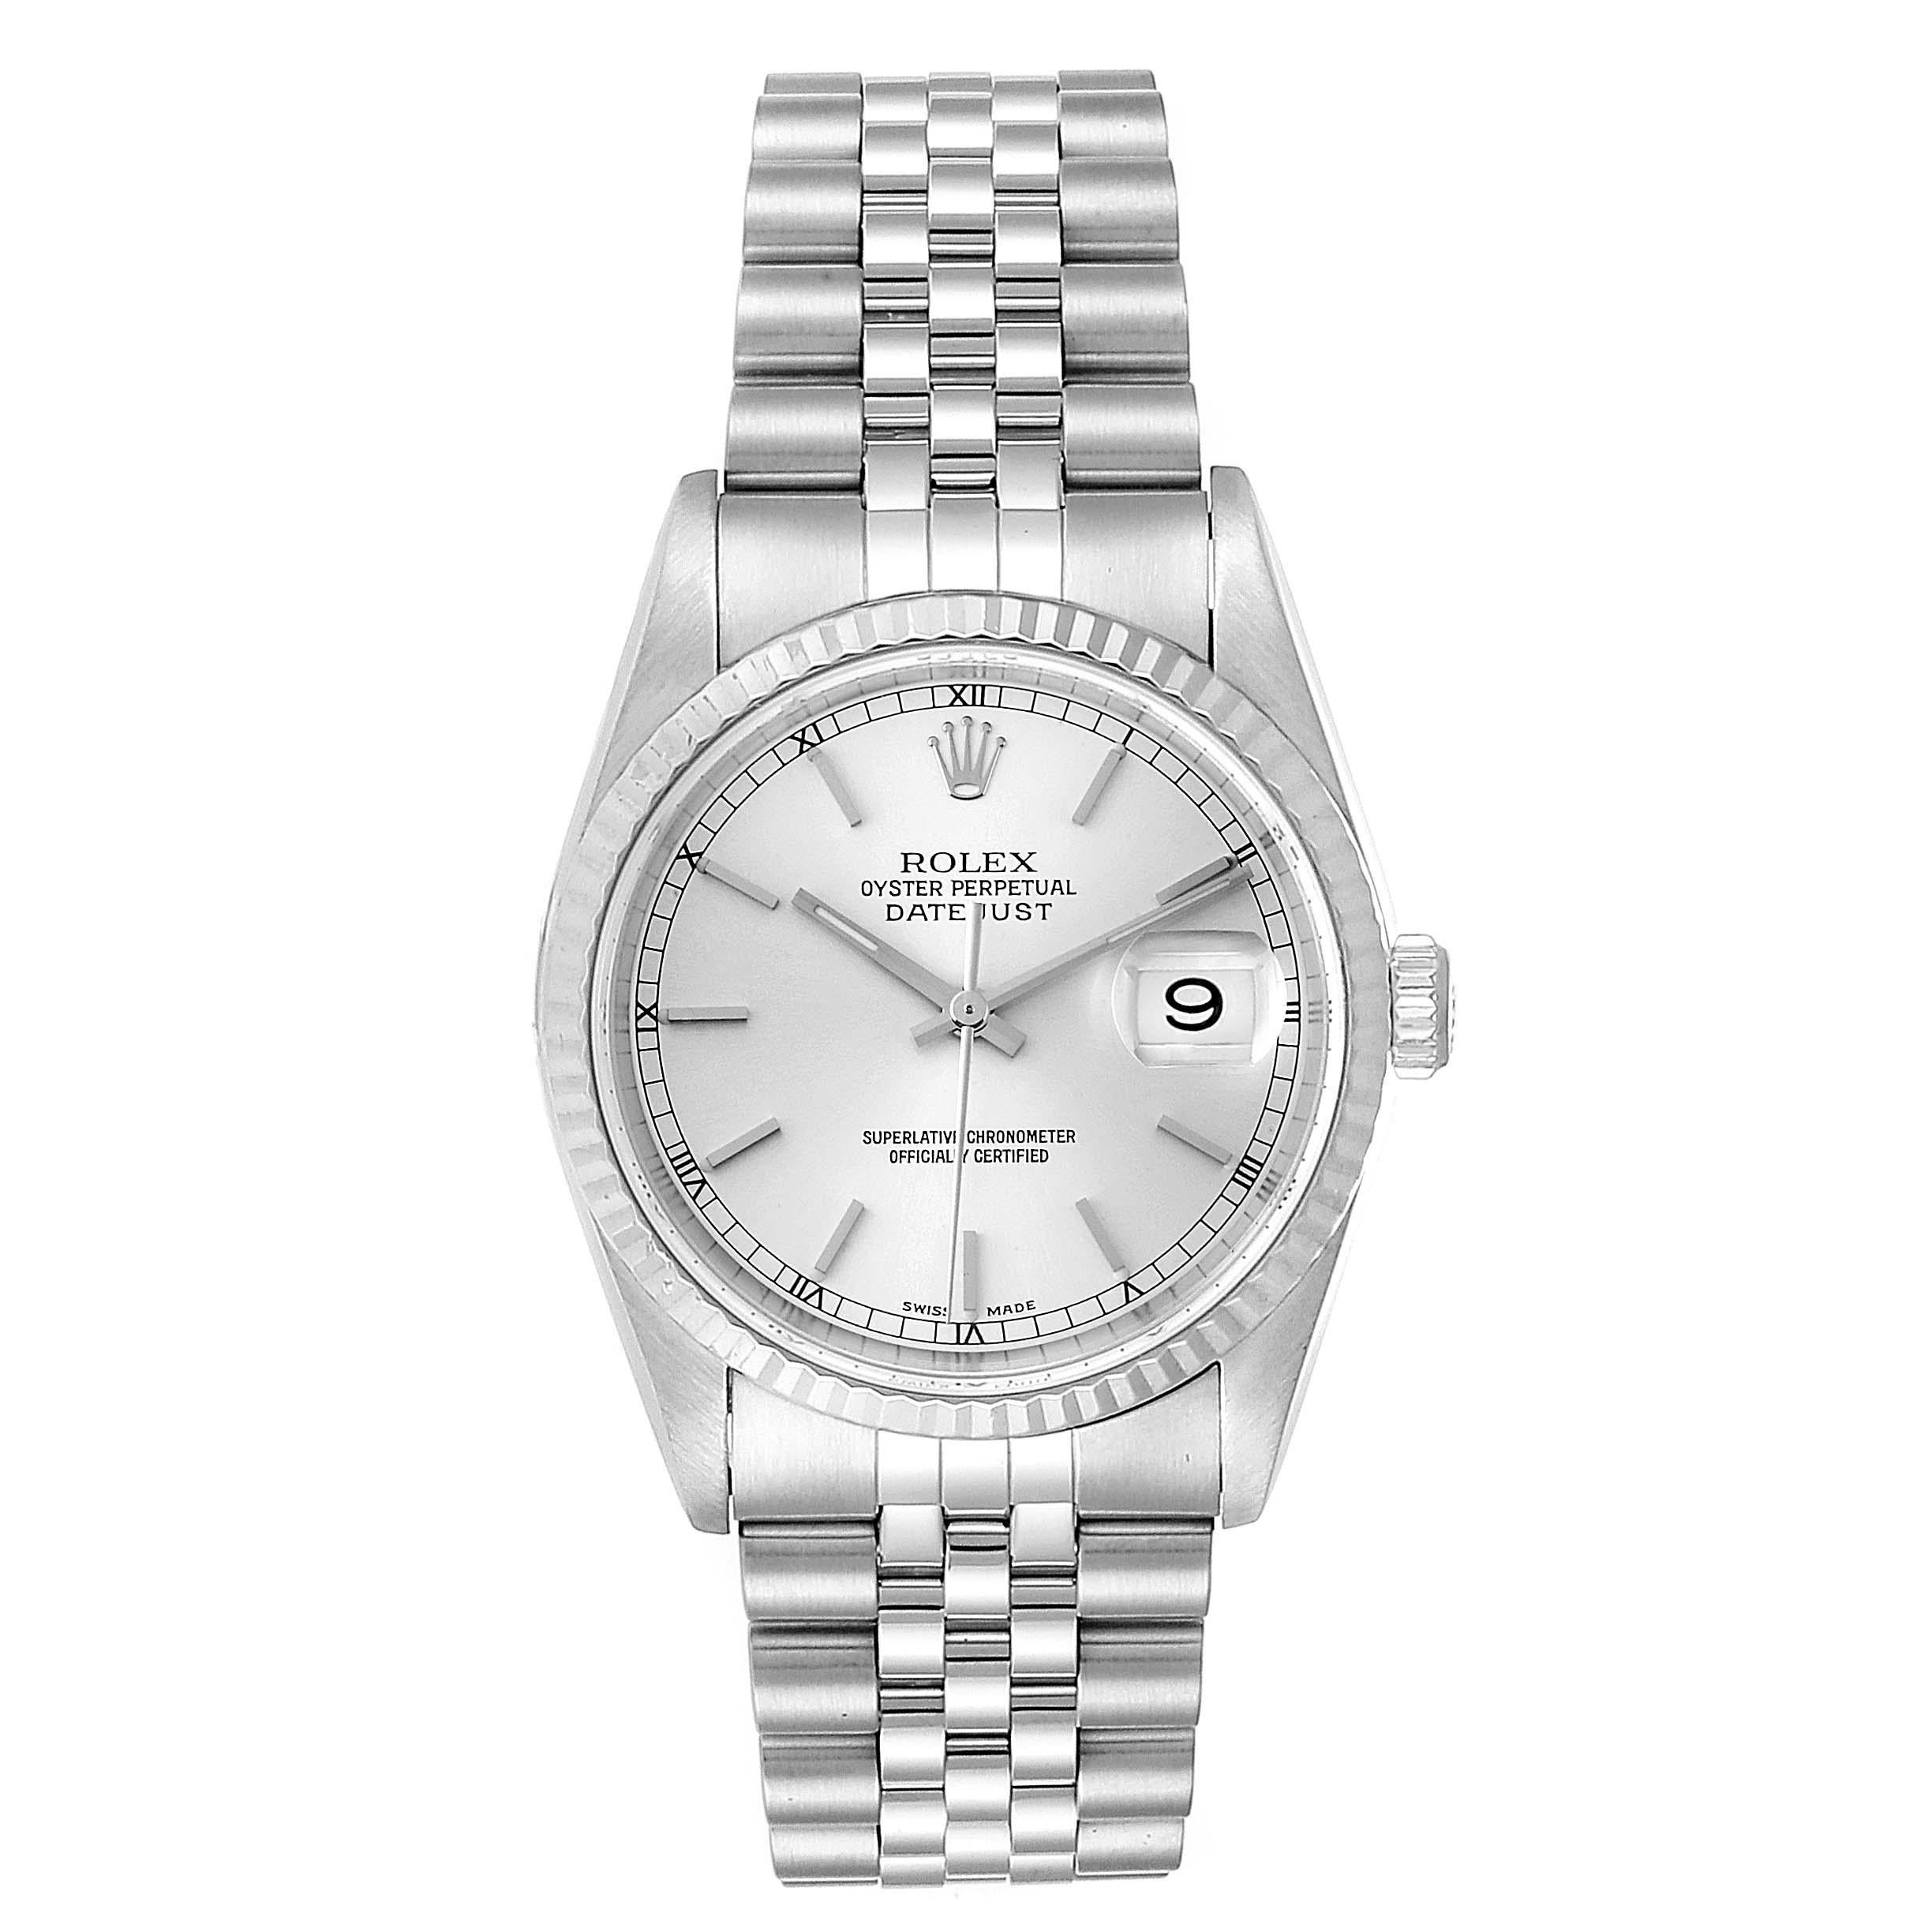 Rolex Datejust 36 Steel White Gold Tapestry Dial Mens Watch 16234. Officially certified chronometer self-winding movement. Stainless steel oyster case 36 mm in diameter. Rolex logo on a crown. 18k white gold fluted bezel. Scratch resistant sapphire